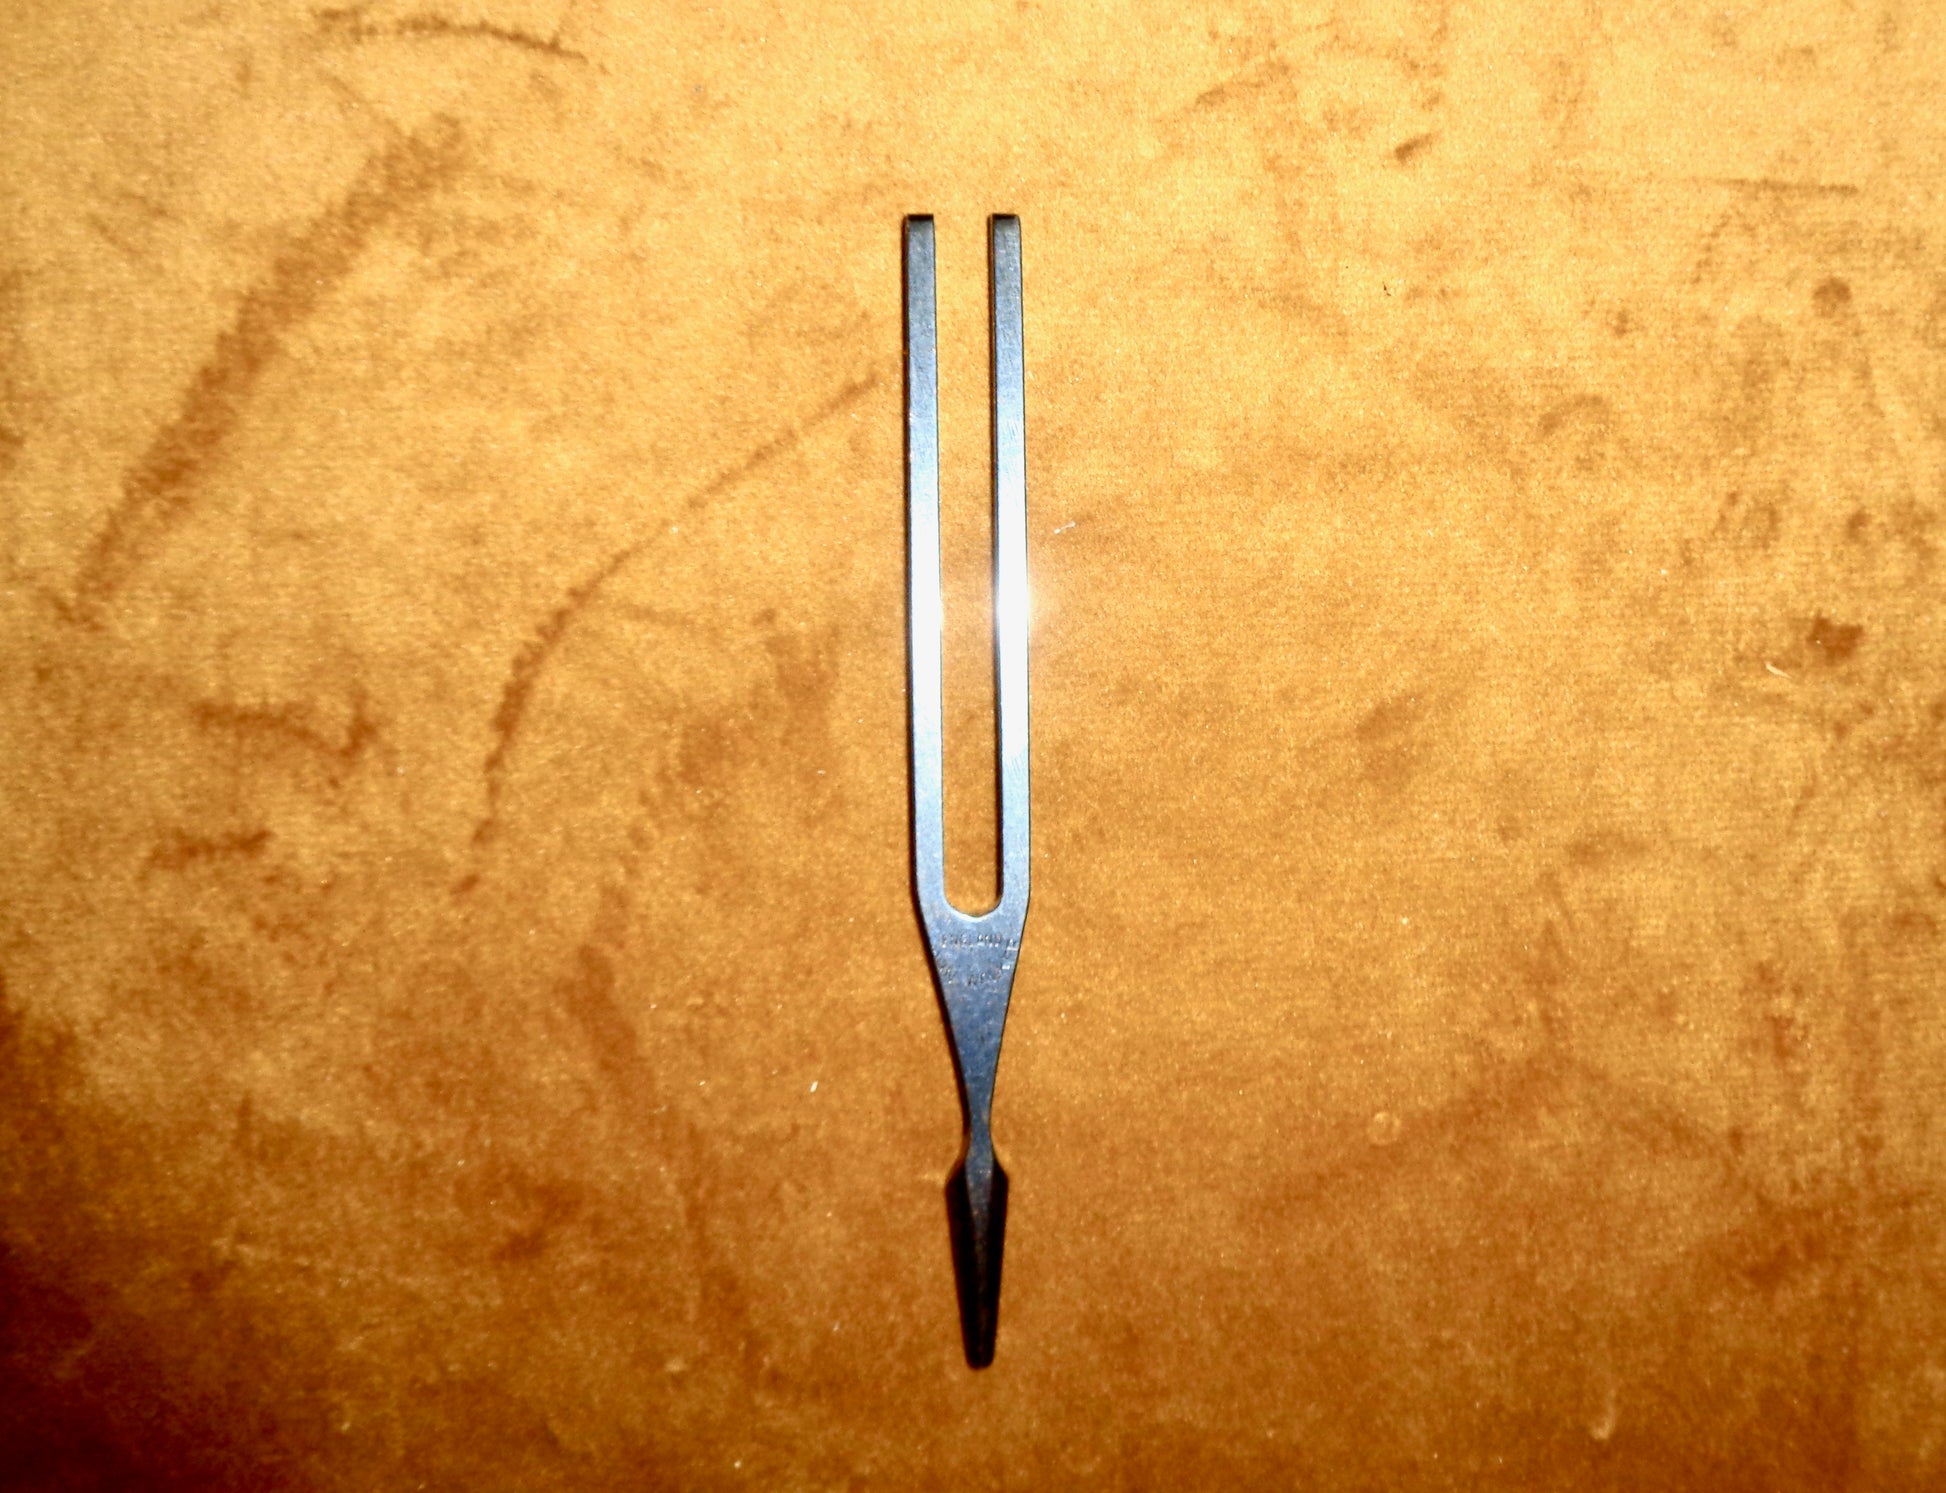 Preowned John Walker Tuning Fork A Standard Frequency 440Hz